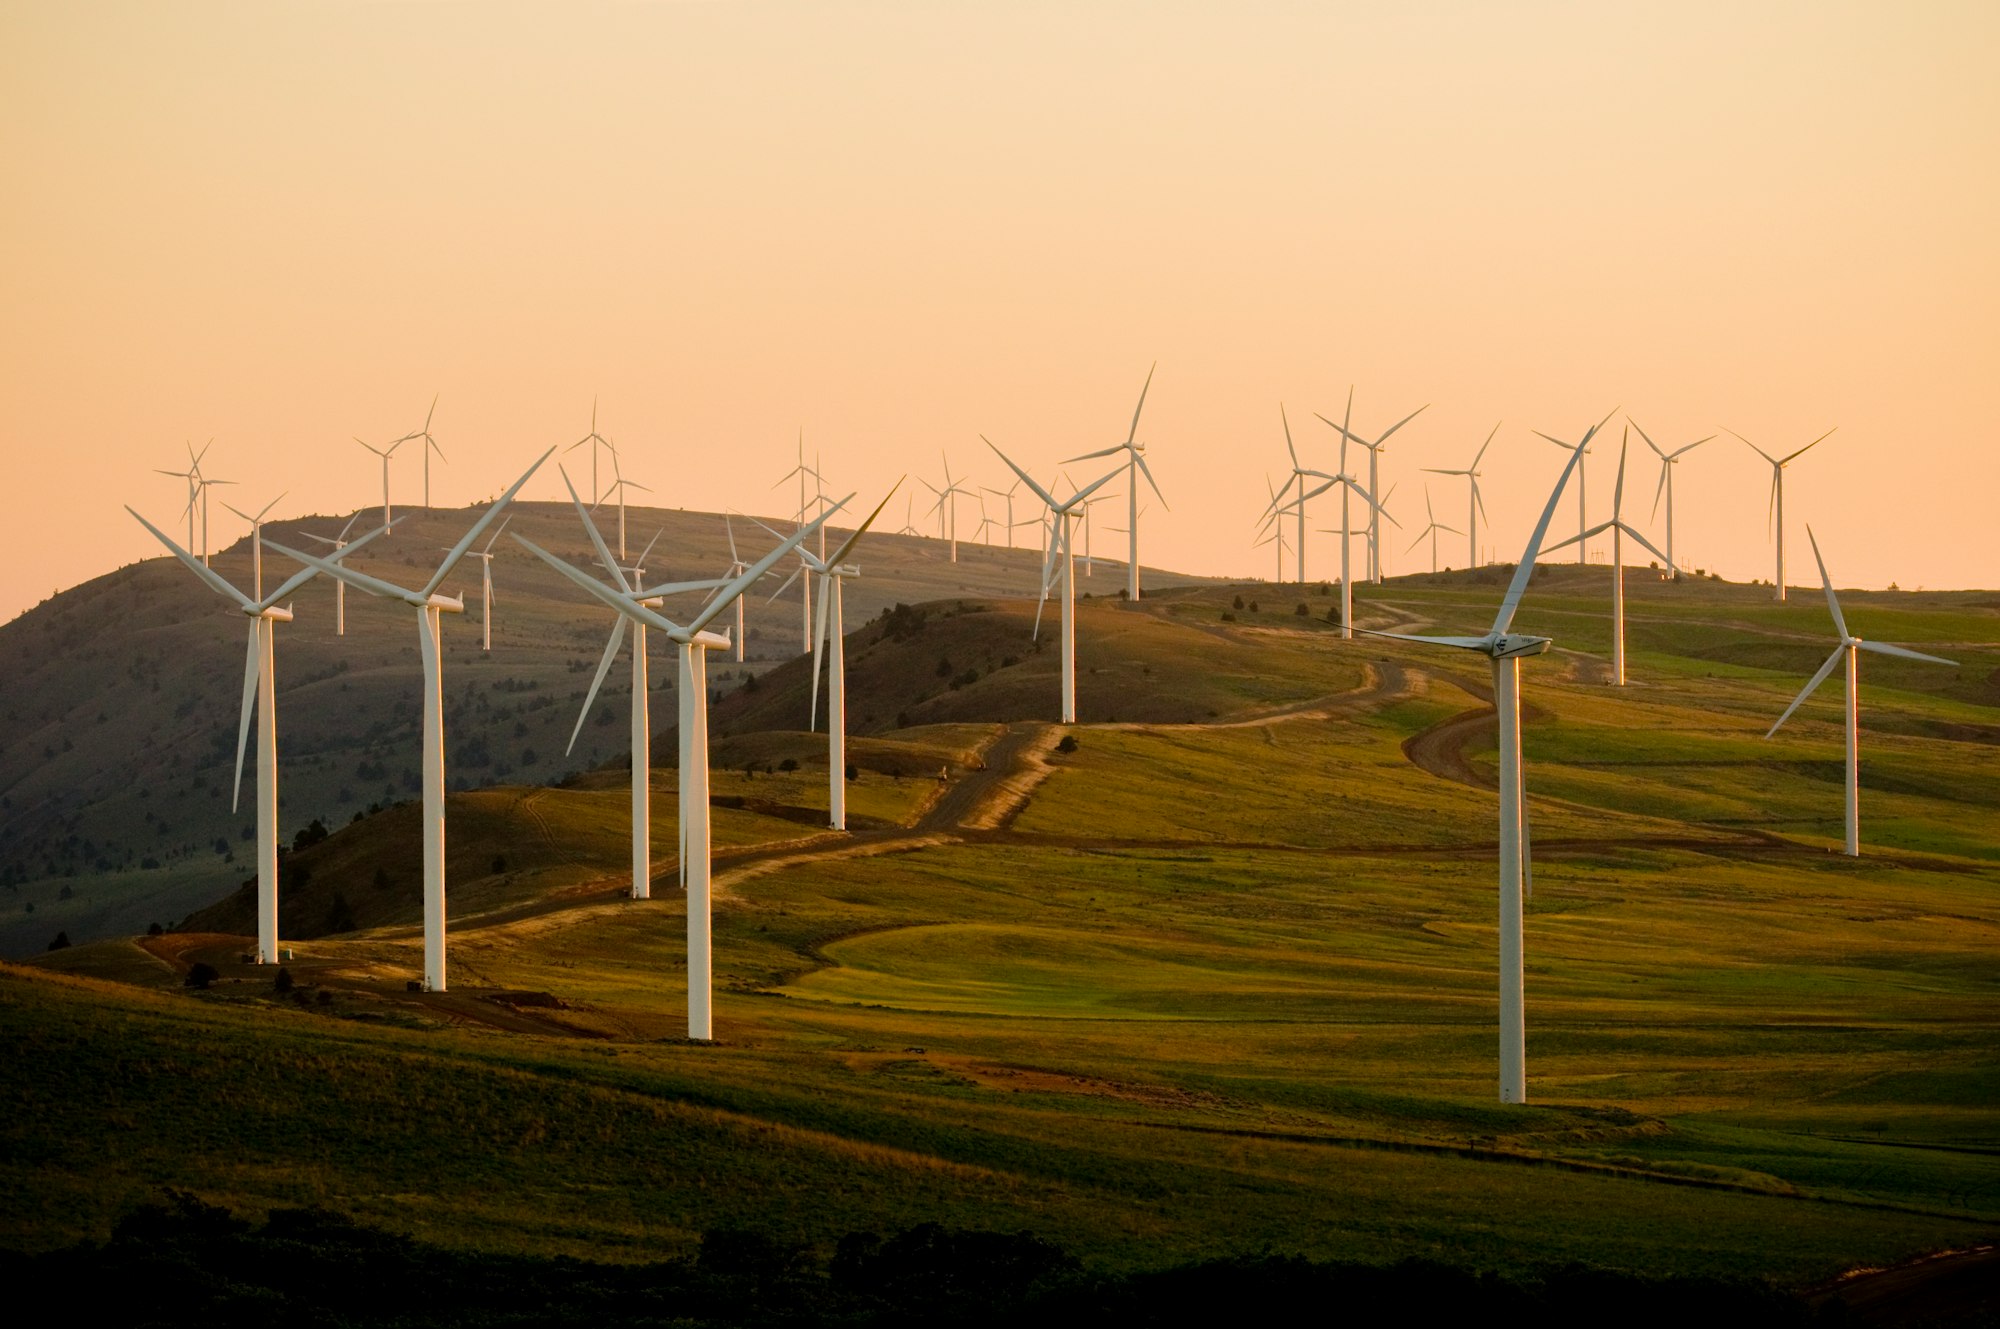 Portugal has just run for 6 days on renewable energy. What can the world learn from it?